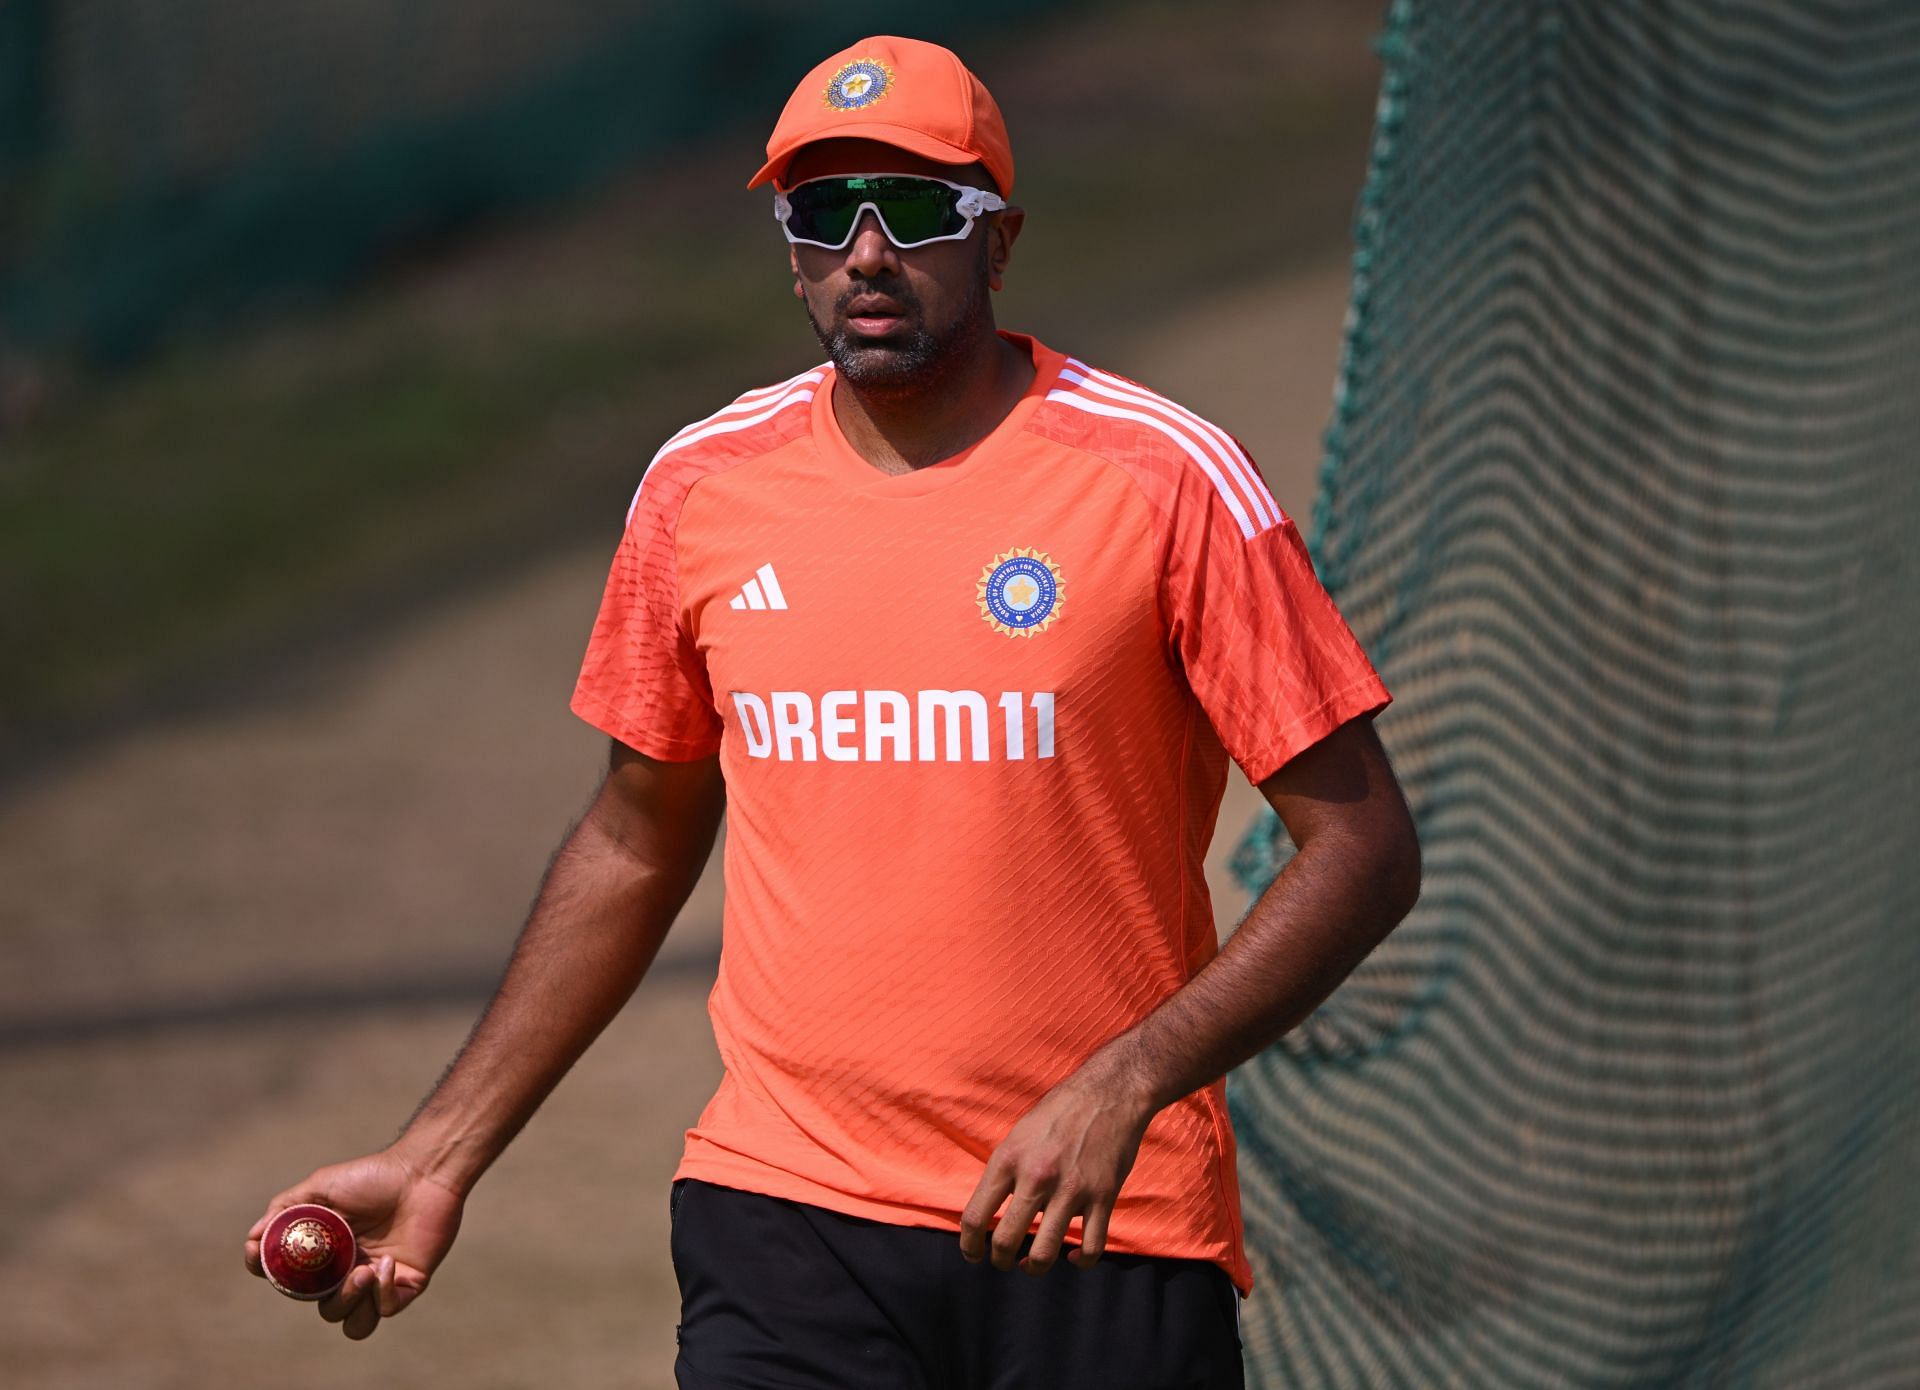 Ravichandran Ashwin is more than capable with the bat at home